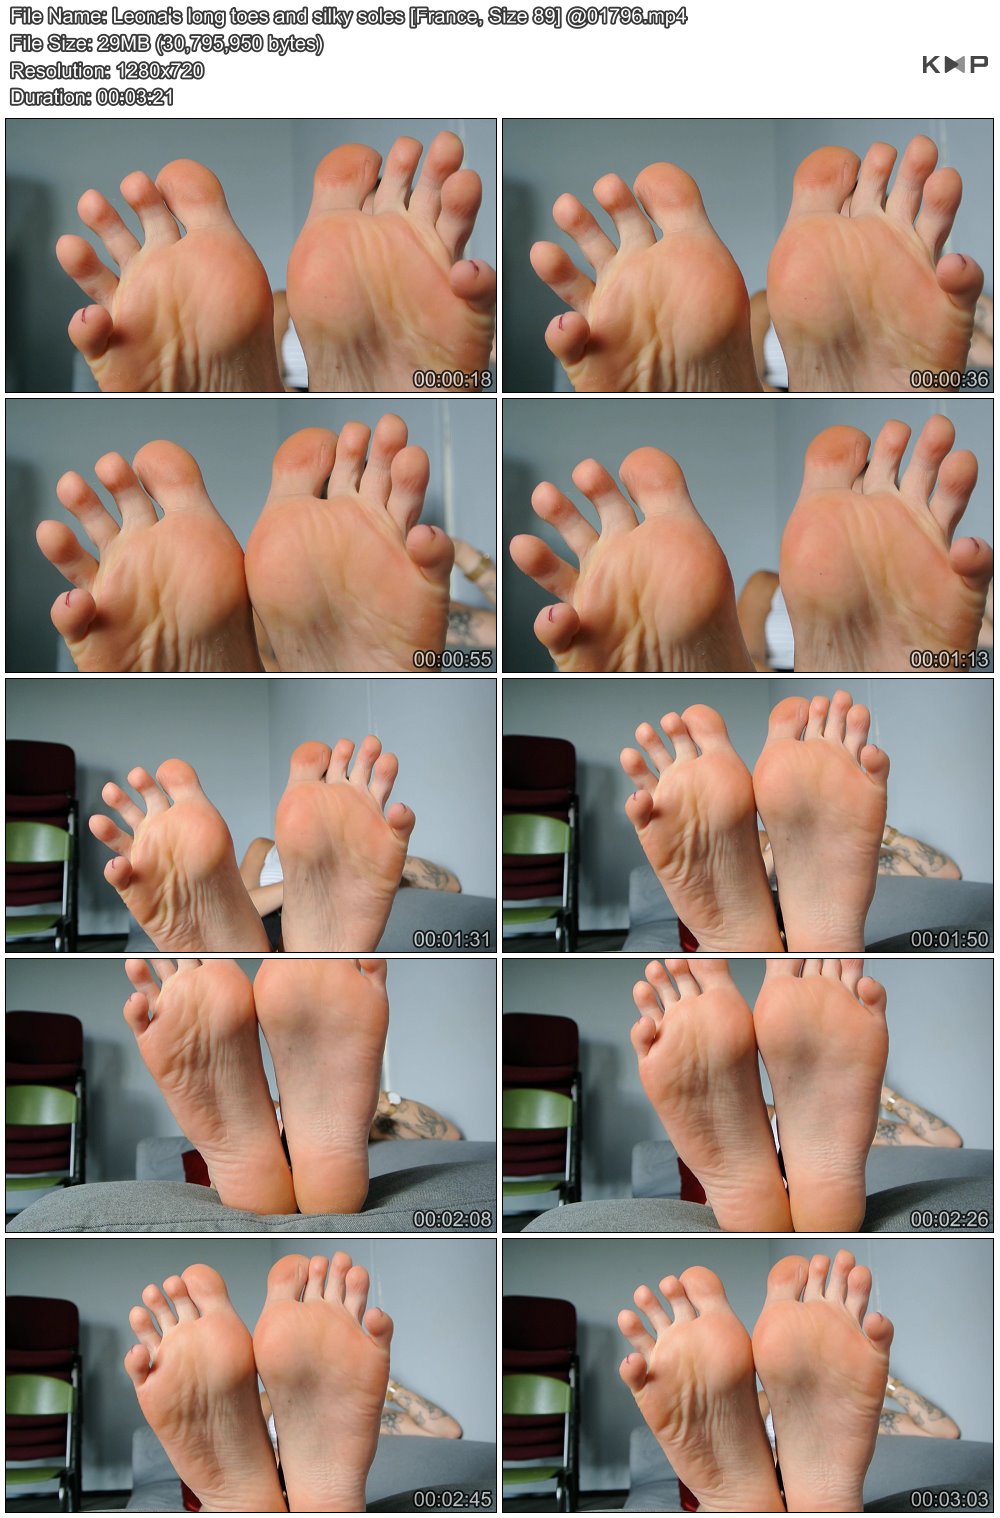 Leona&#039;s long toes and silky soles [France, Size 89] @01796.JPG